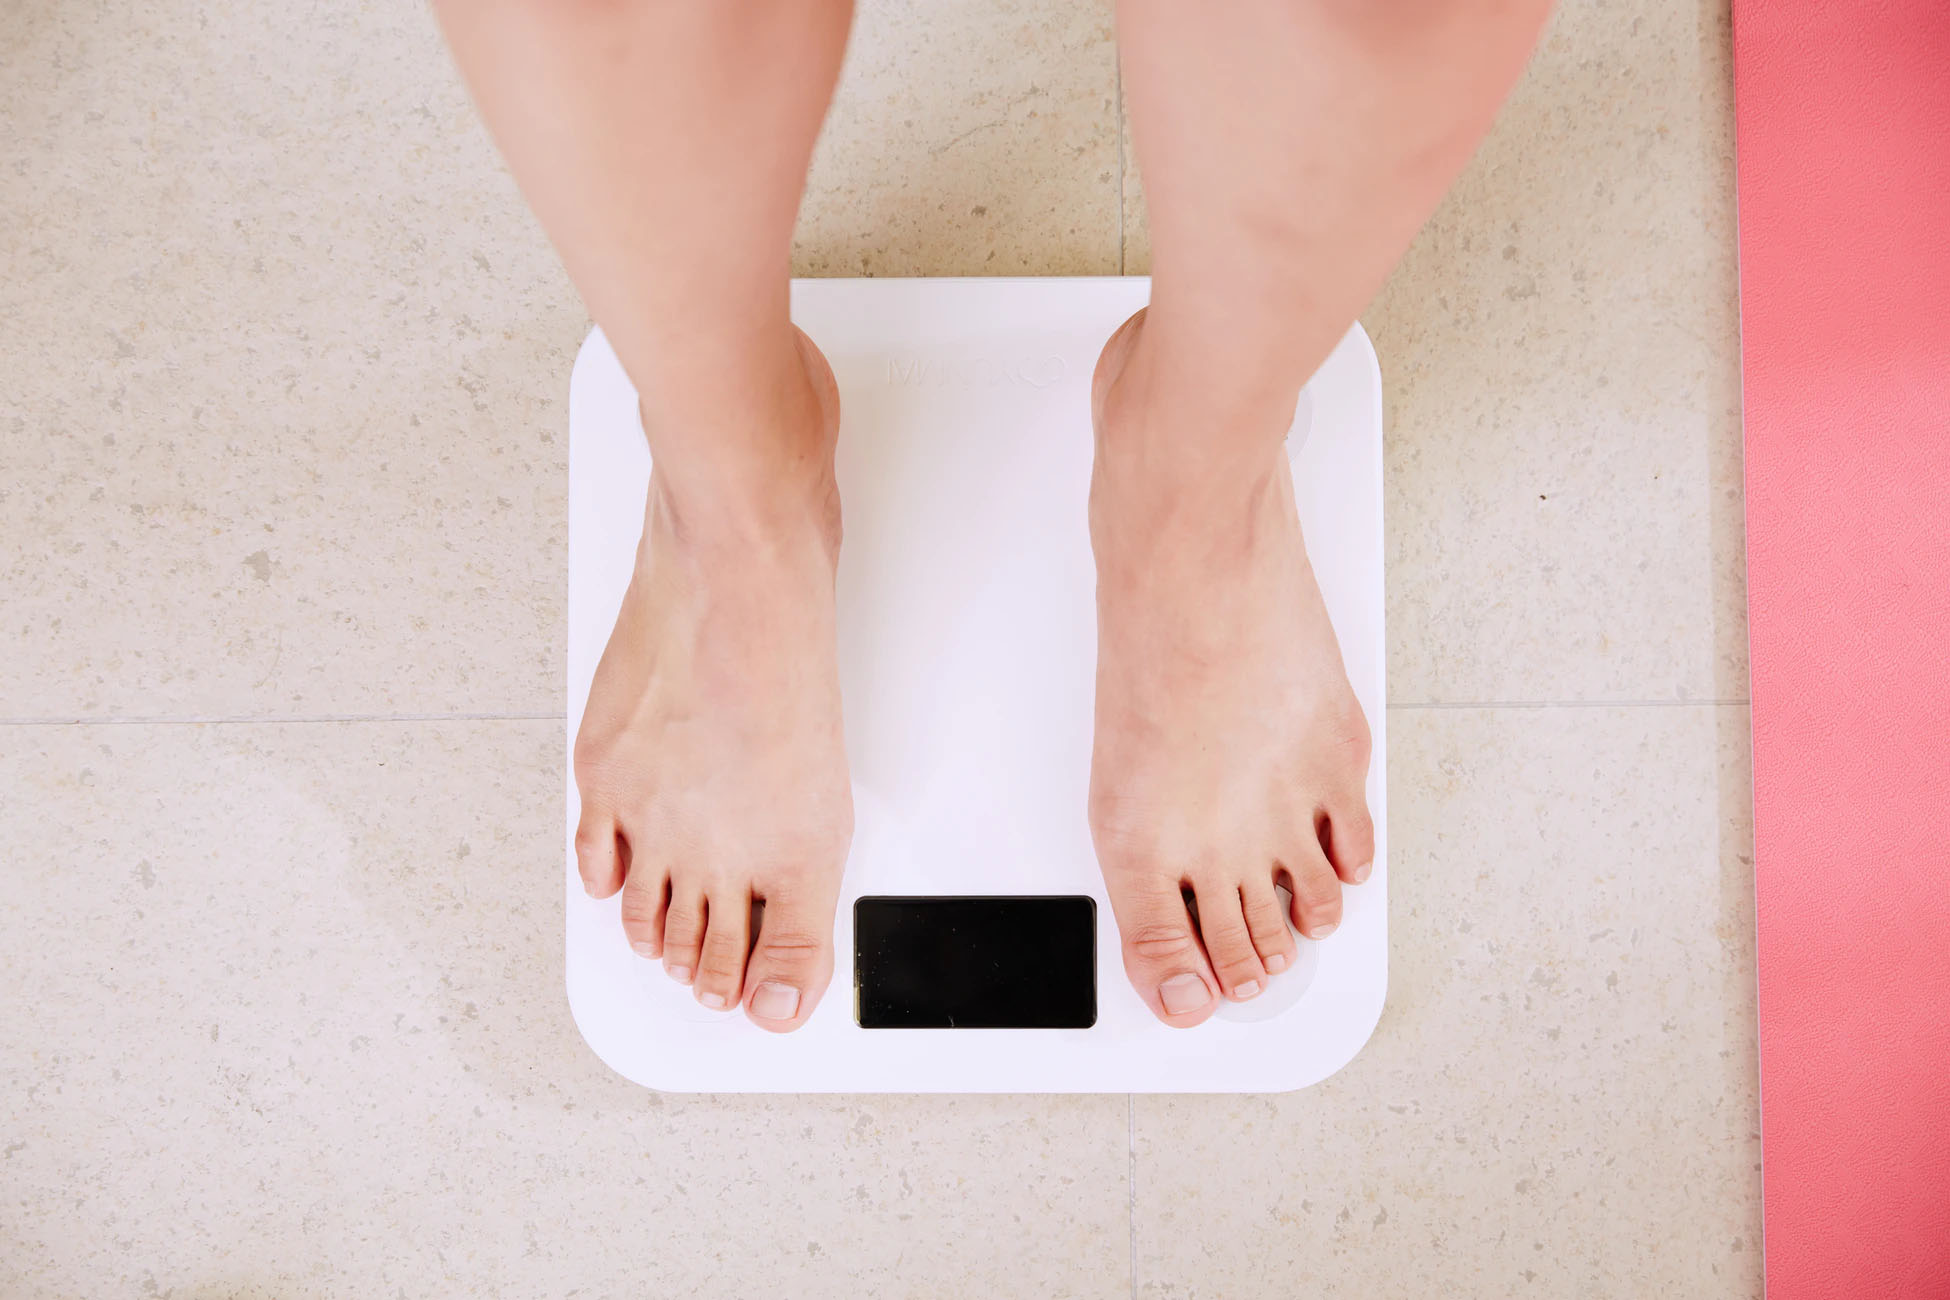 Someone standing on a weight scale